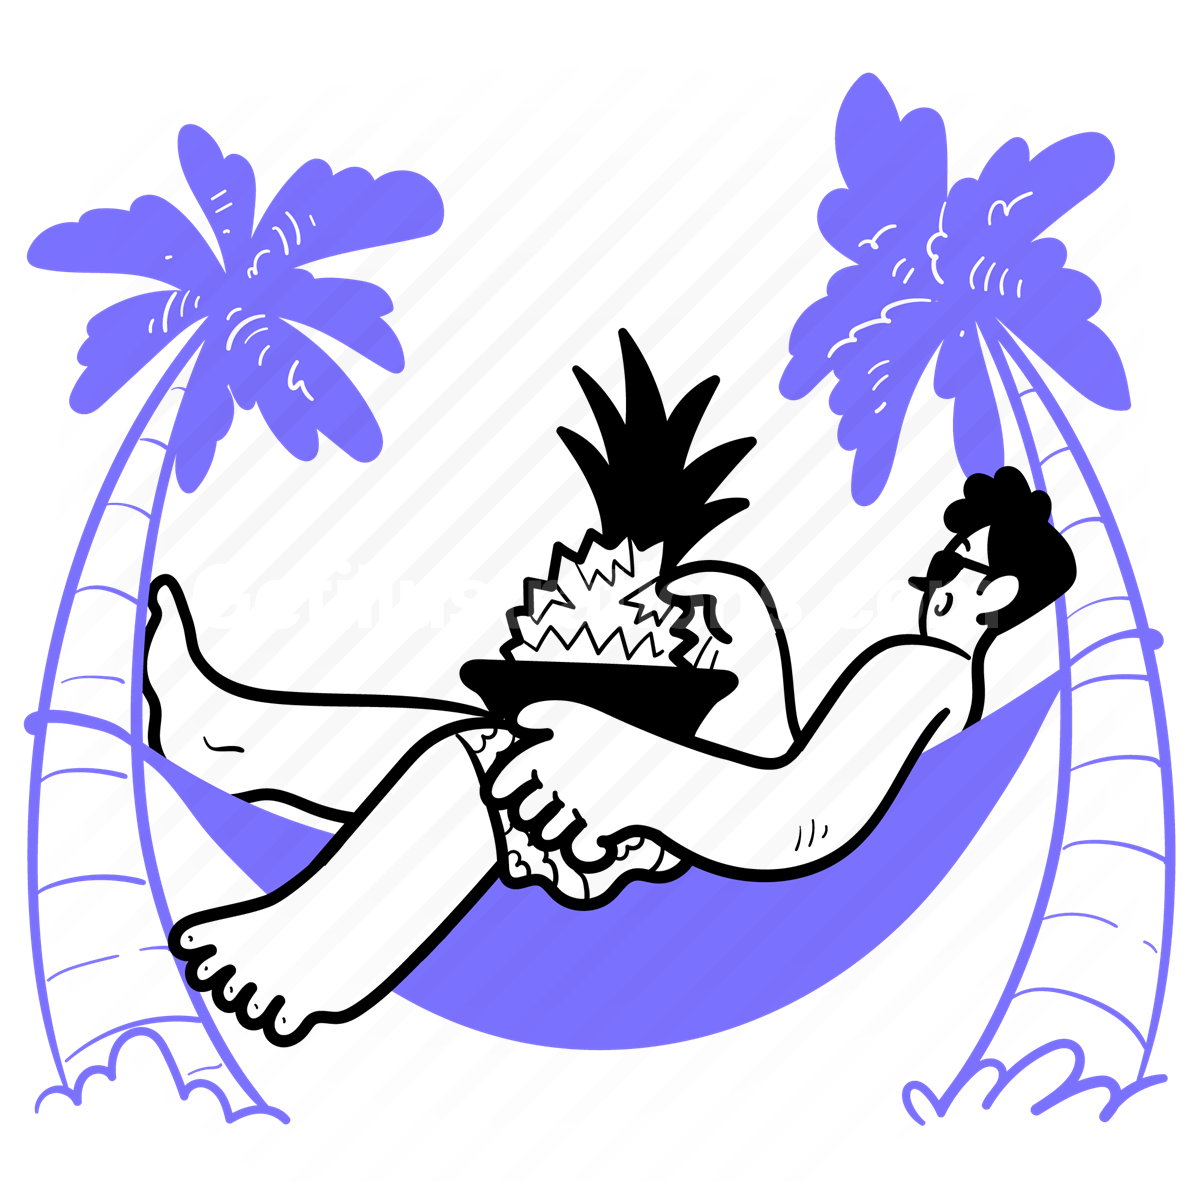 tropical, holiday, vacation, relax, chill, pineapple, palm, tree, man